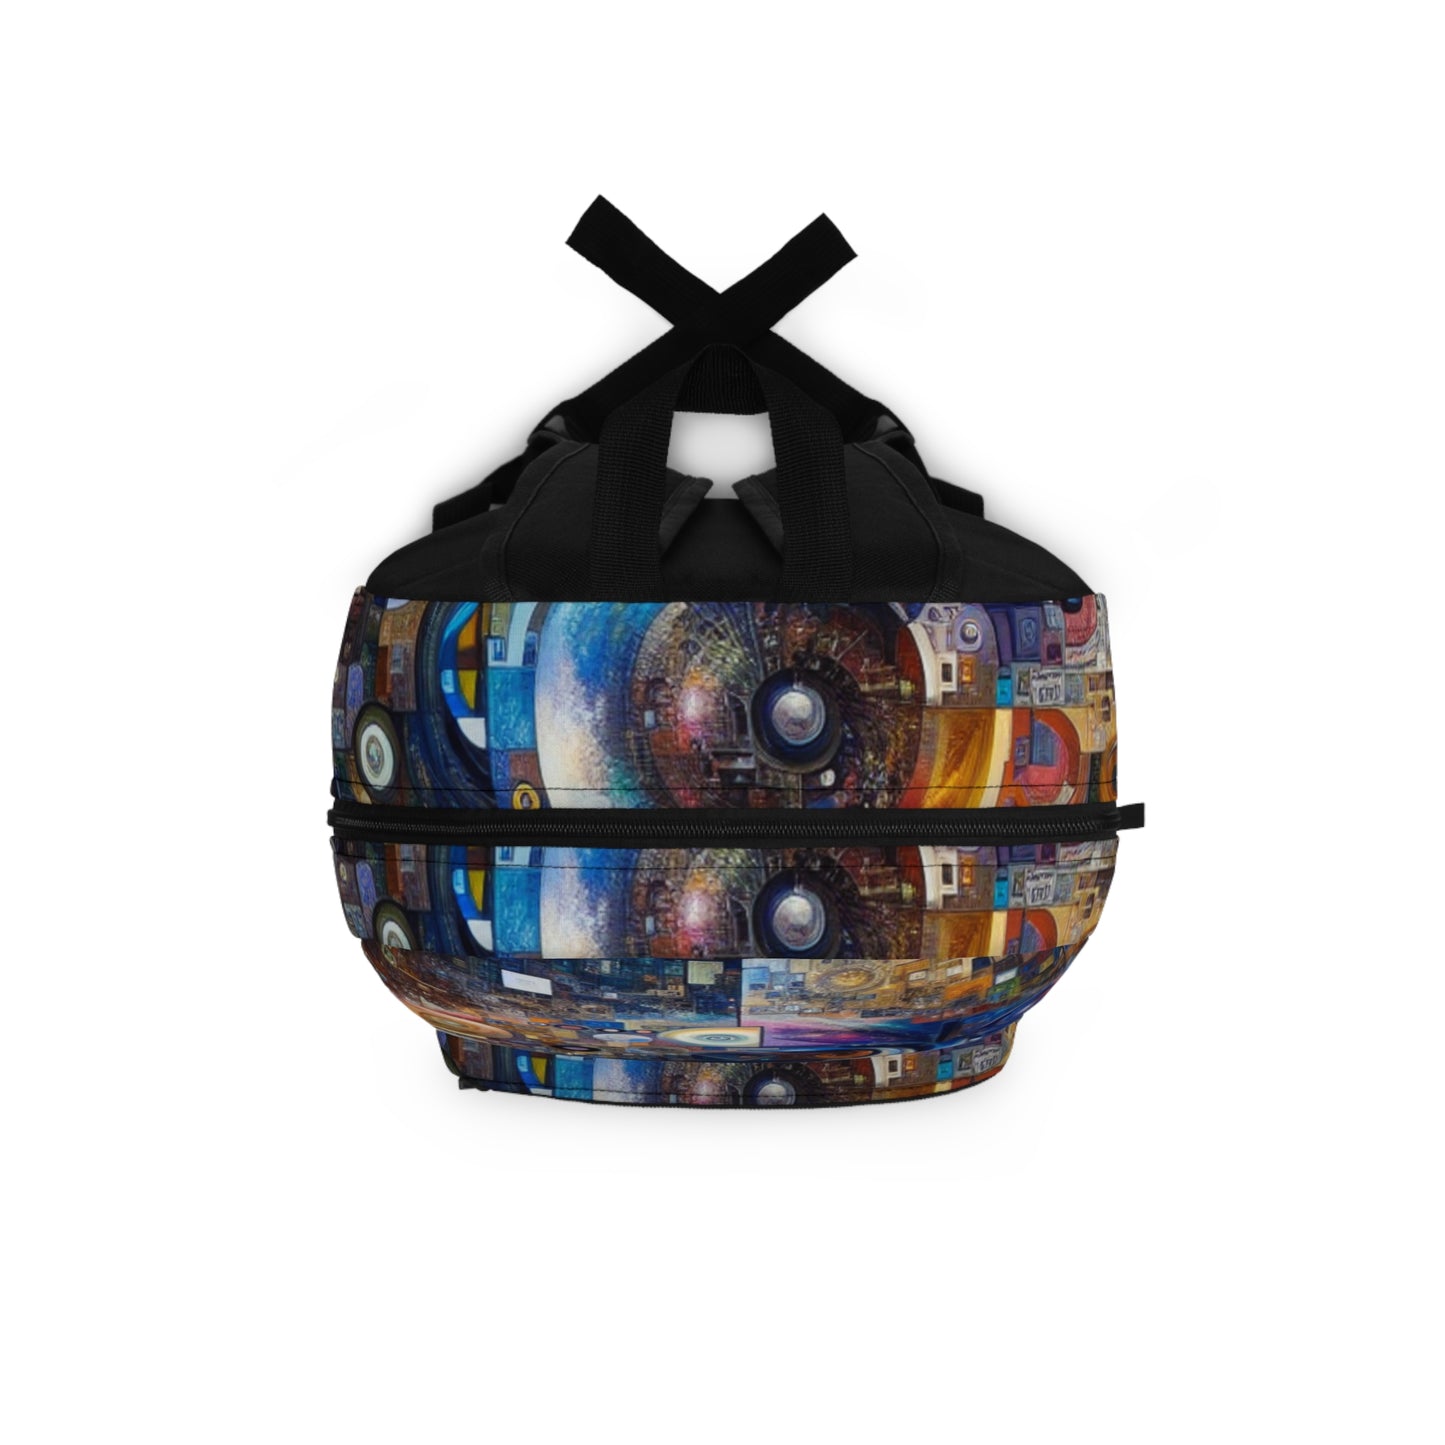 "Perception Distorted: A Postmodern Commentary on Reality" - The Alien Backpack Postmodern Art